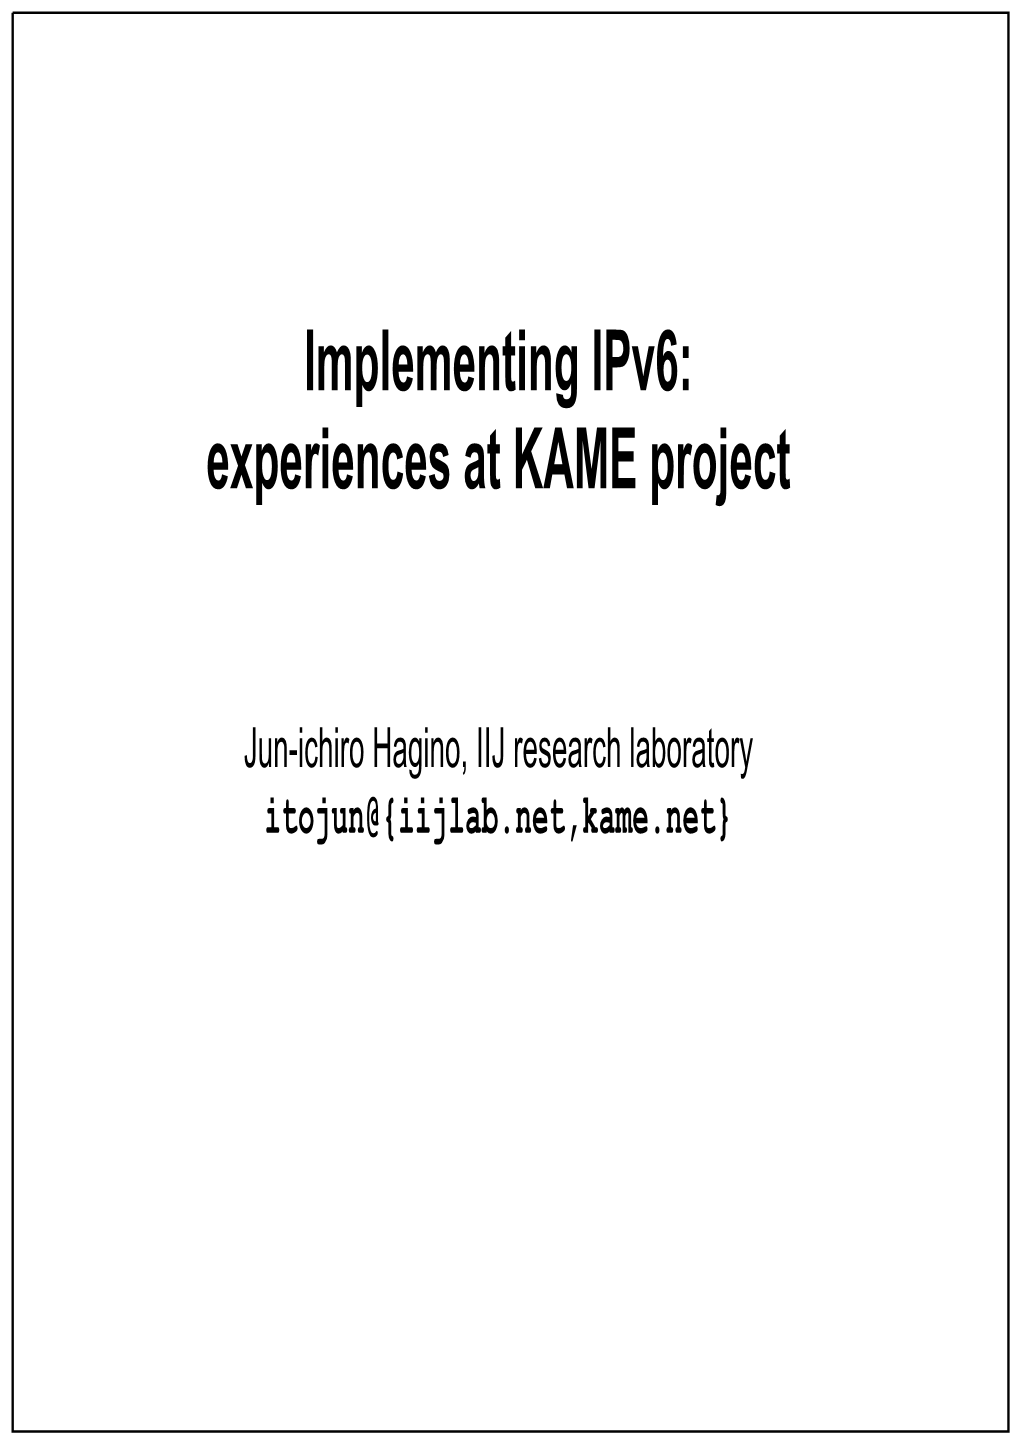 Implementing Ipv6: Experiences at KAME Project